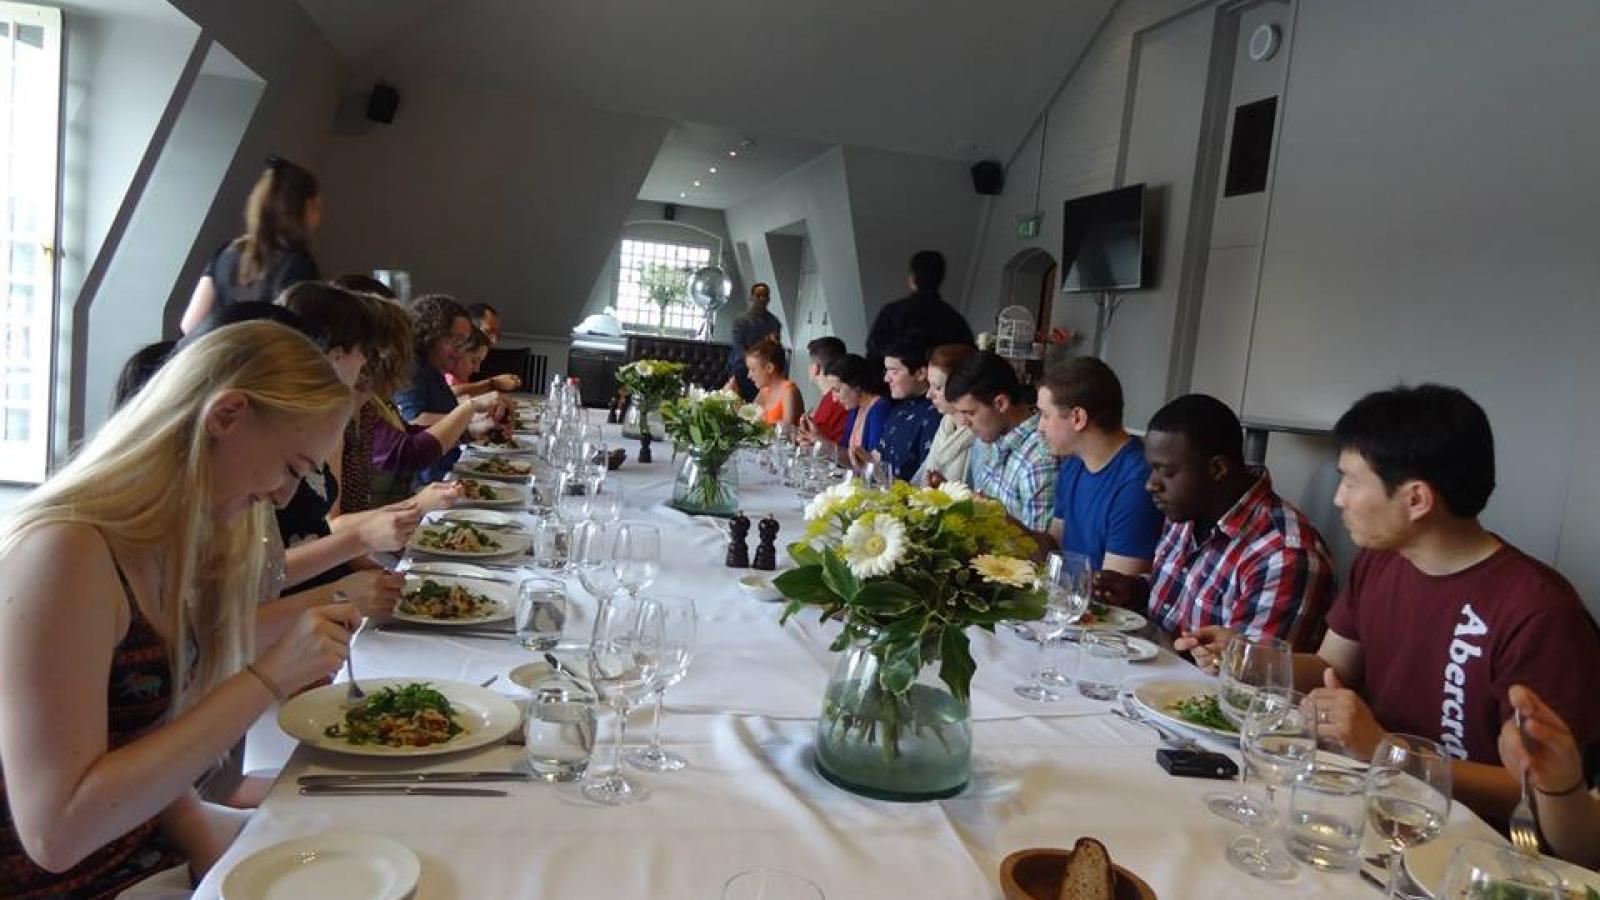 Several students enjoying the Group Meal at The Swan restaurant by Shakespeare’s Globe Theatre. 